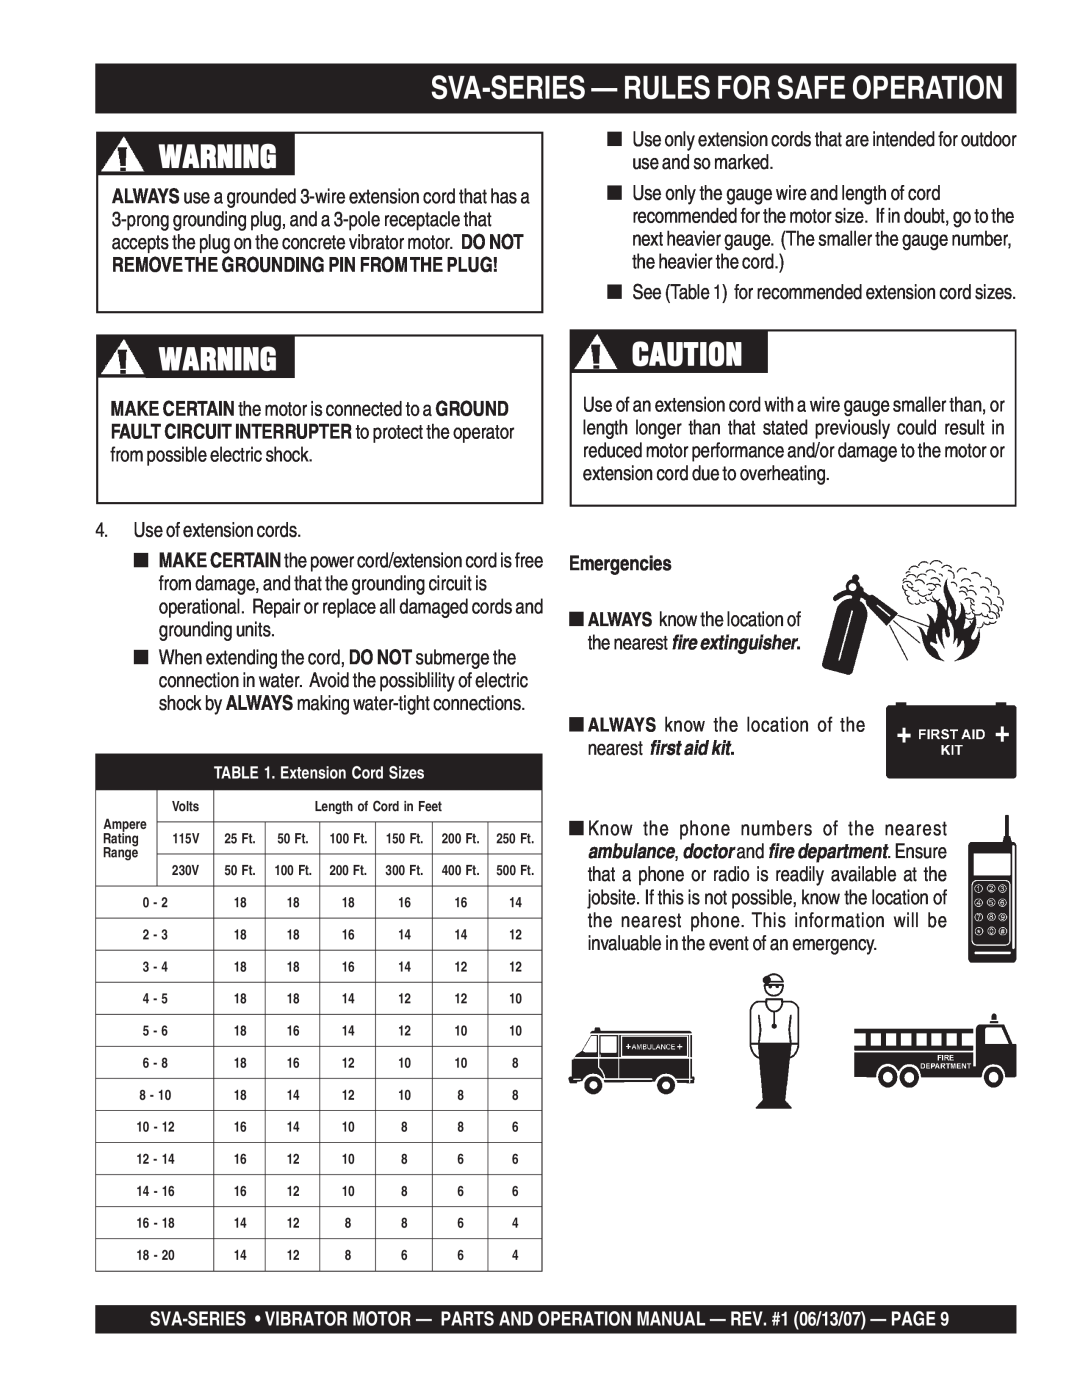 Stow SVA-1 Sva-Series - Rules For Safe Operation, Removethe Grounding Pin Fromthe Plug, Emergencies, Extension Cord Sizes 